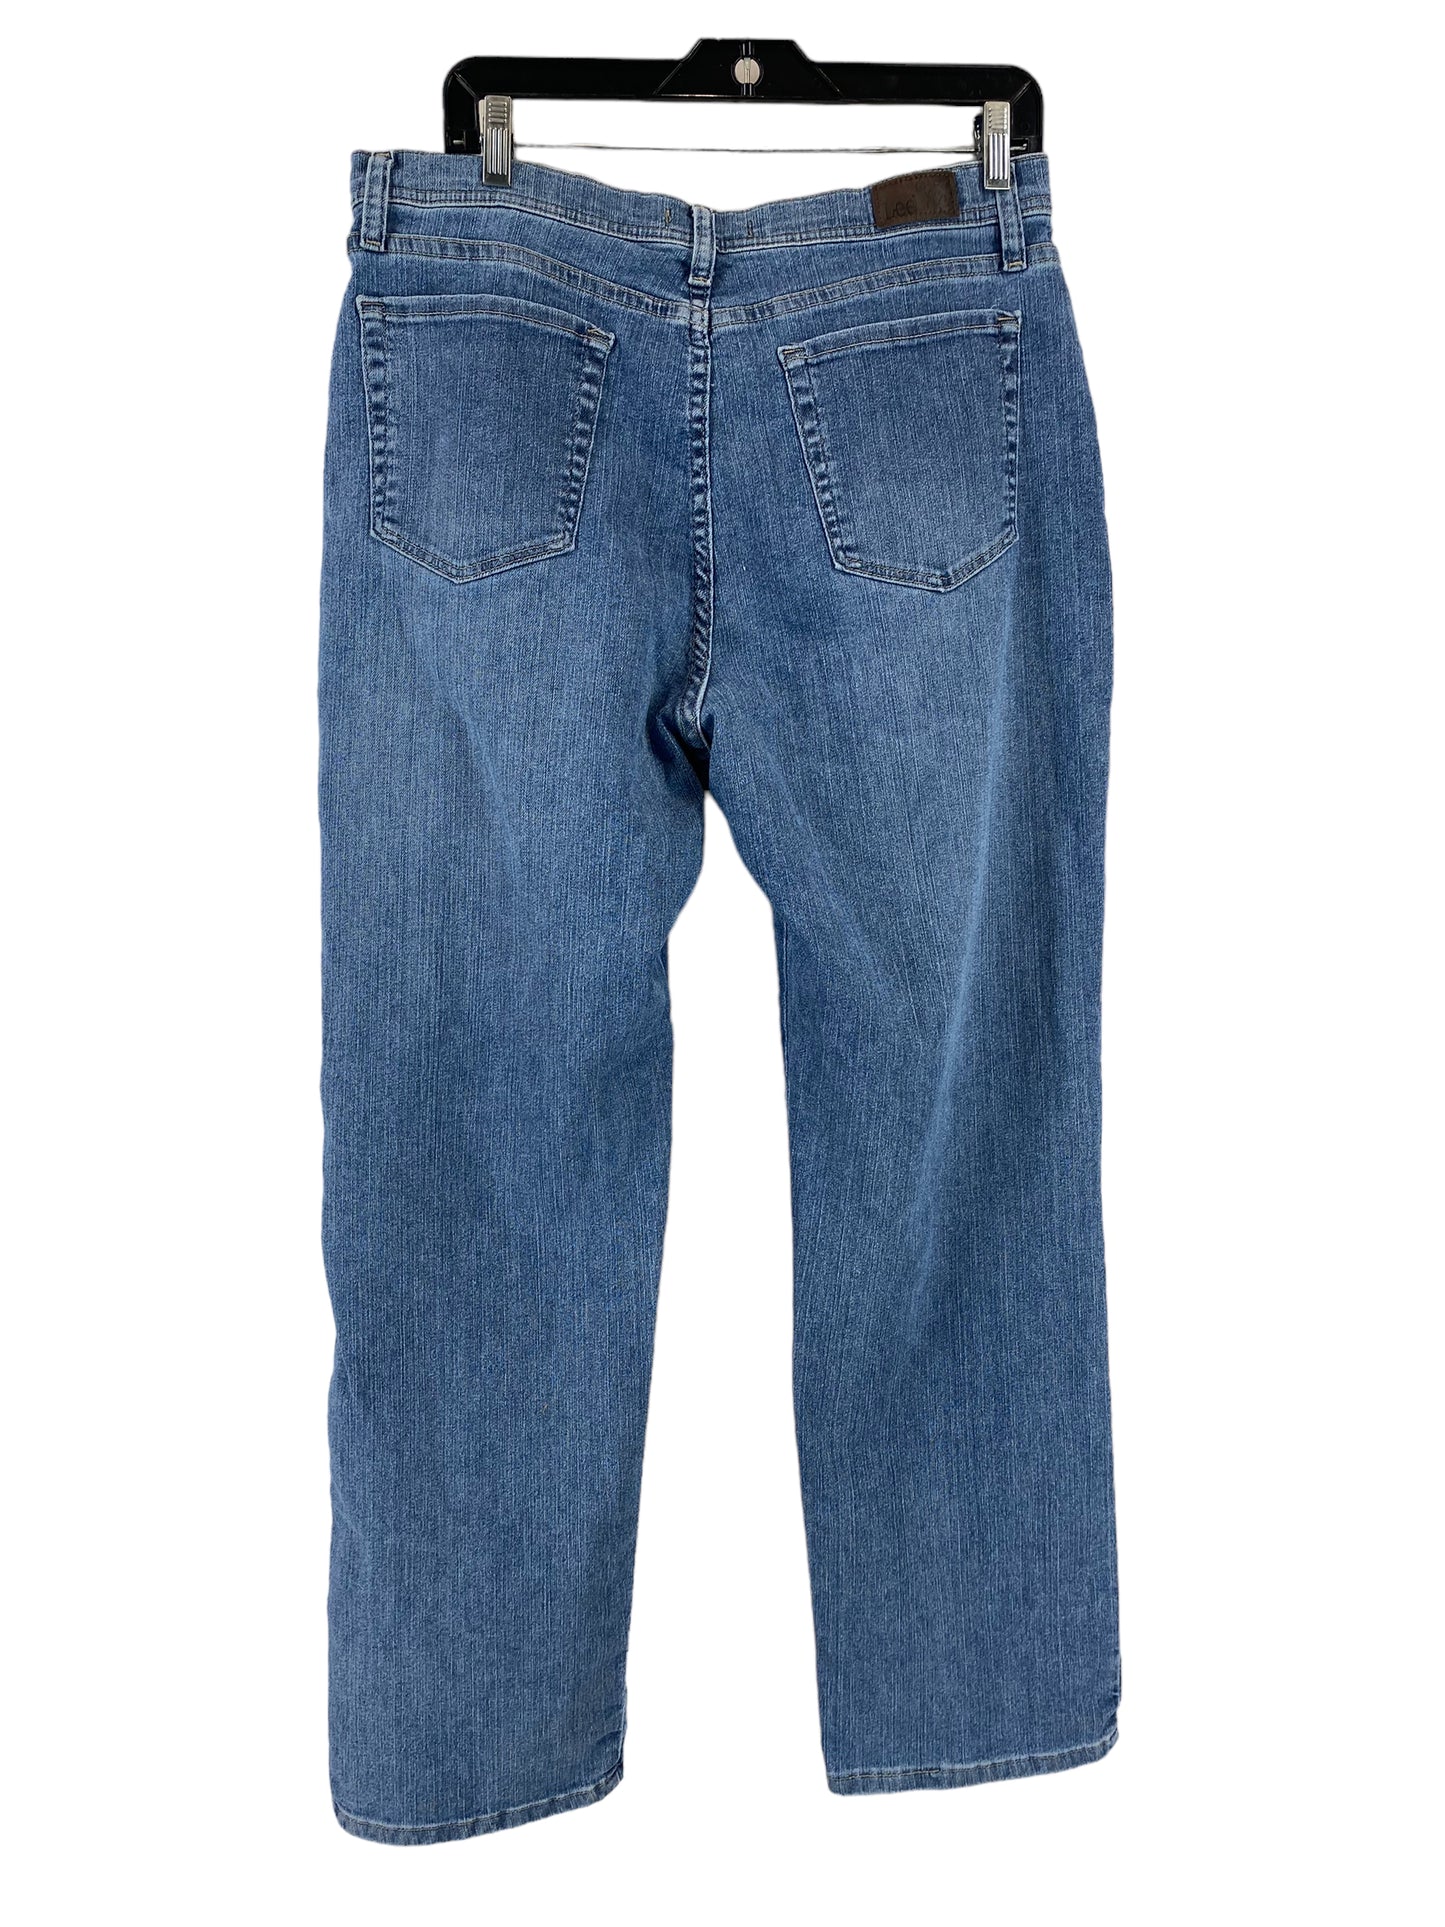 Jeans Straight By Lee  Size: 16